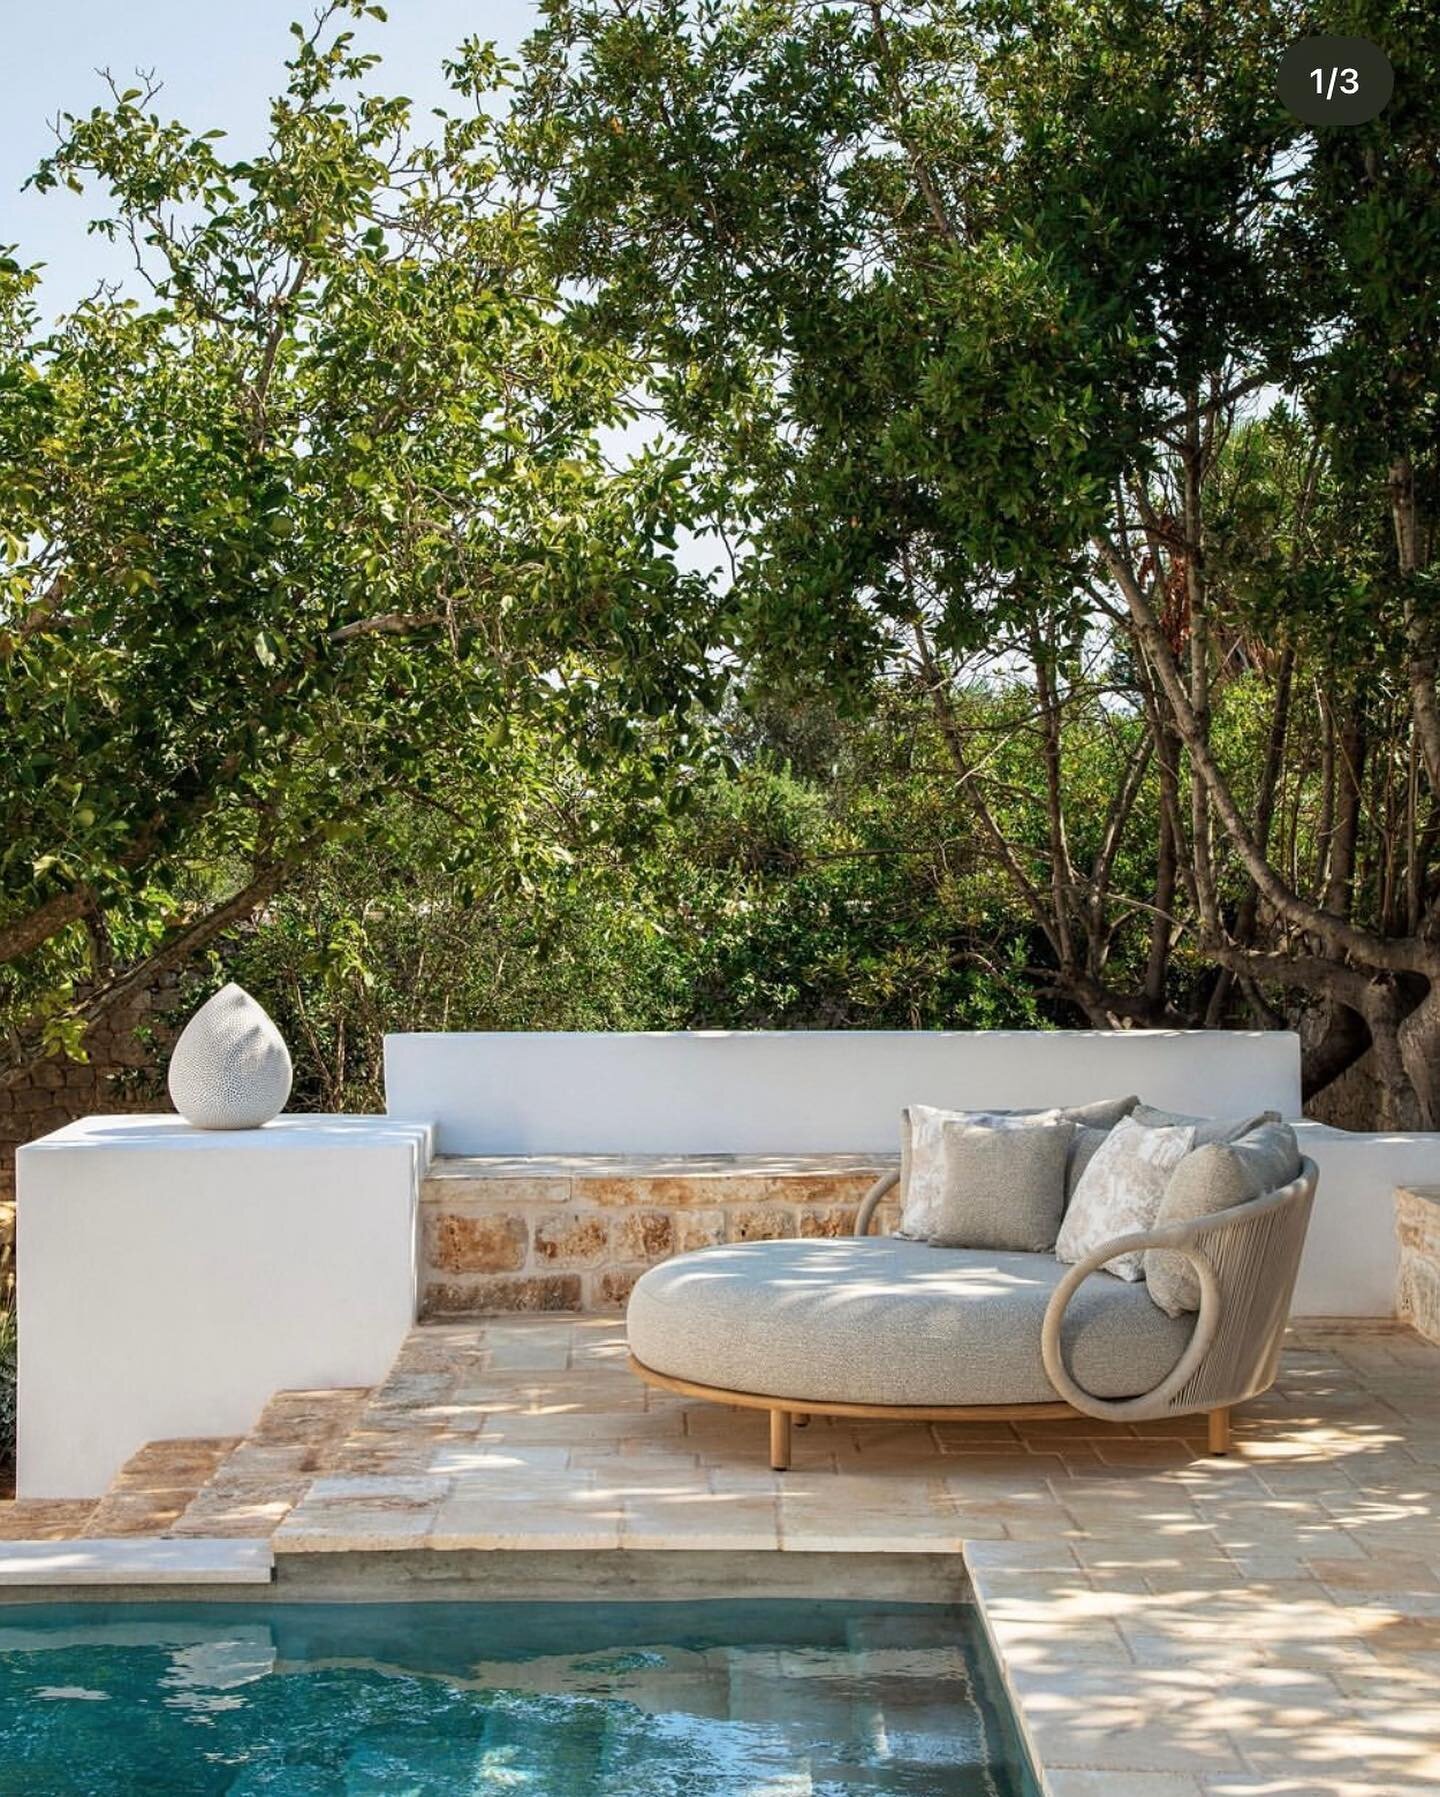 The Karen daybed by @talenti_outdoorliving gives the outdoor environment an intimate and reassuring atmosphere, thanks to the African-inspired design that recalls the appearance of a protective cocoon. The craftsmanship of the back, supported by coun